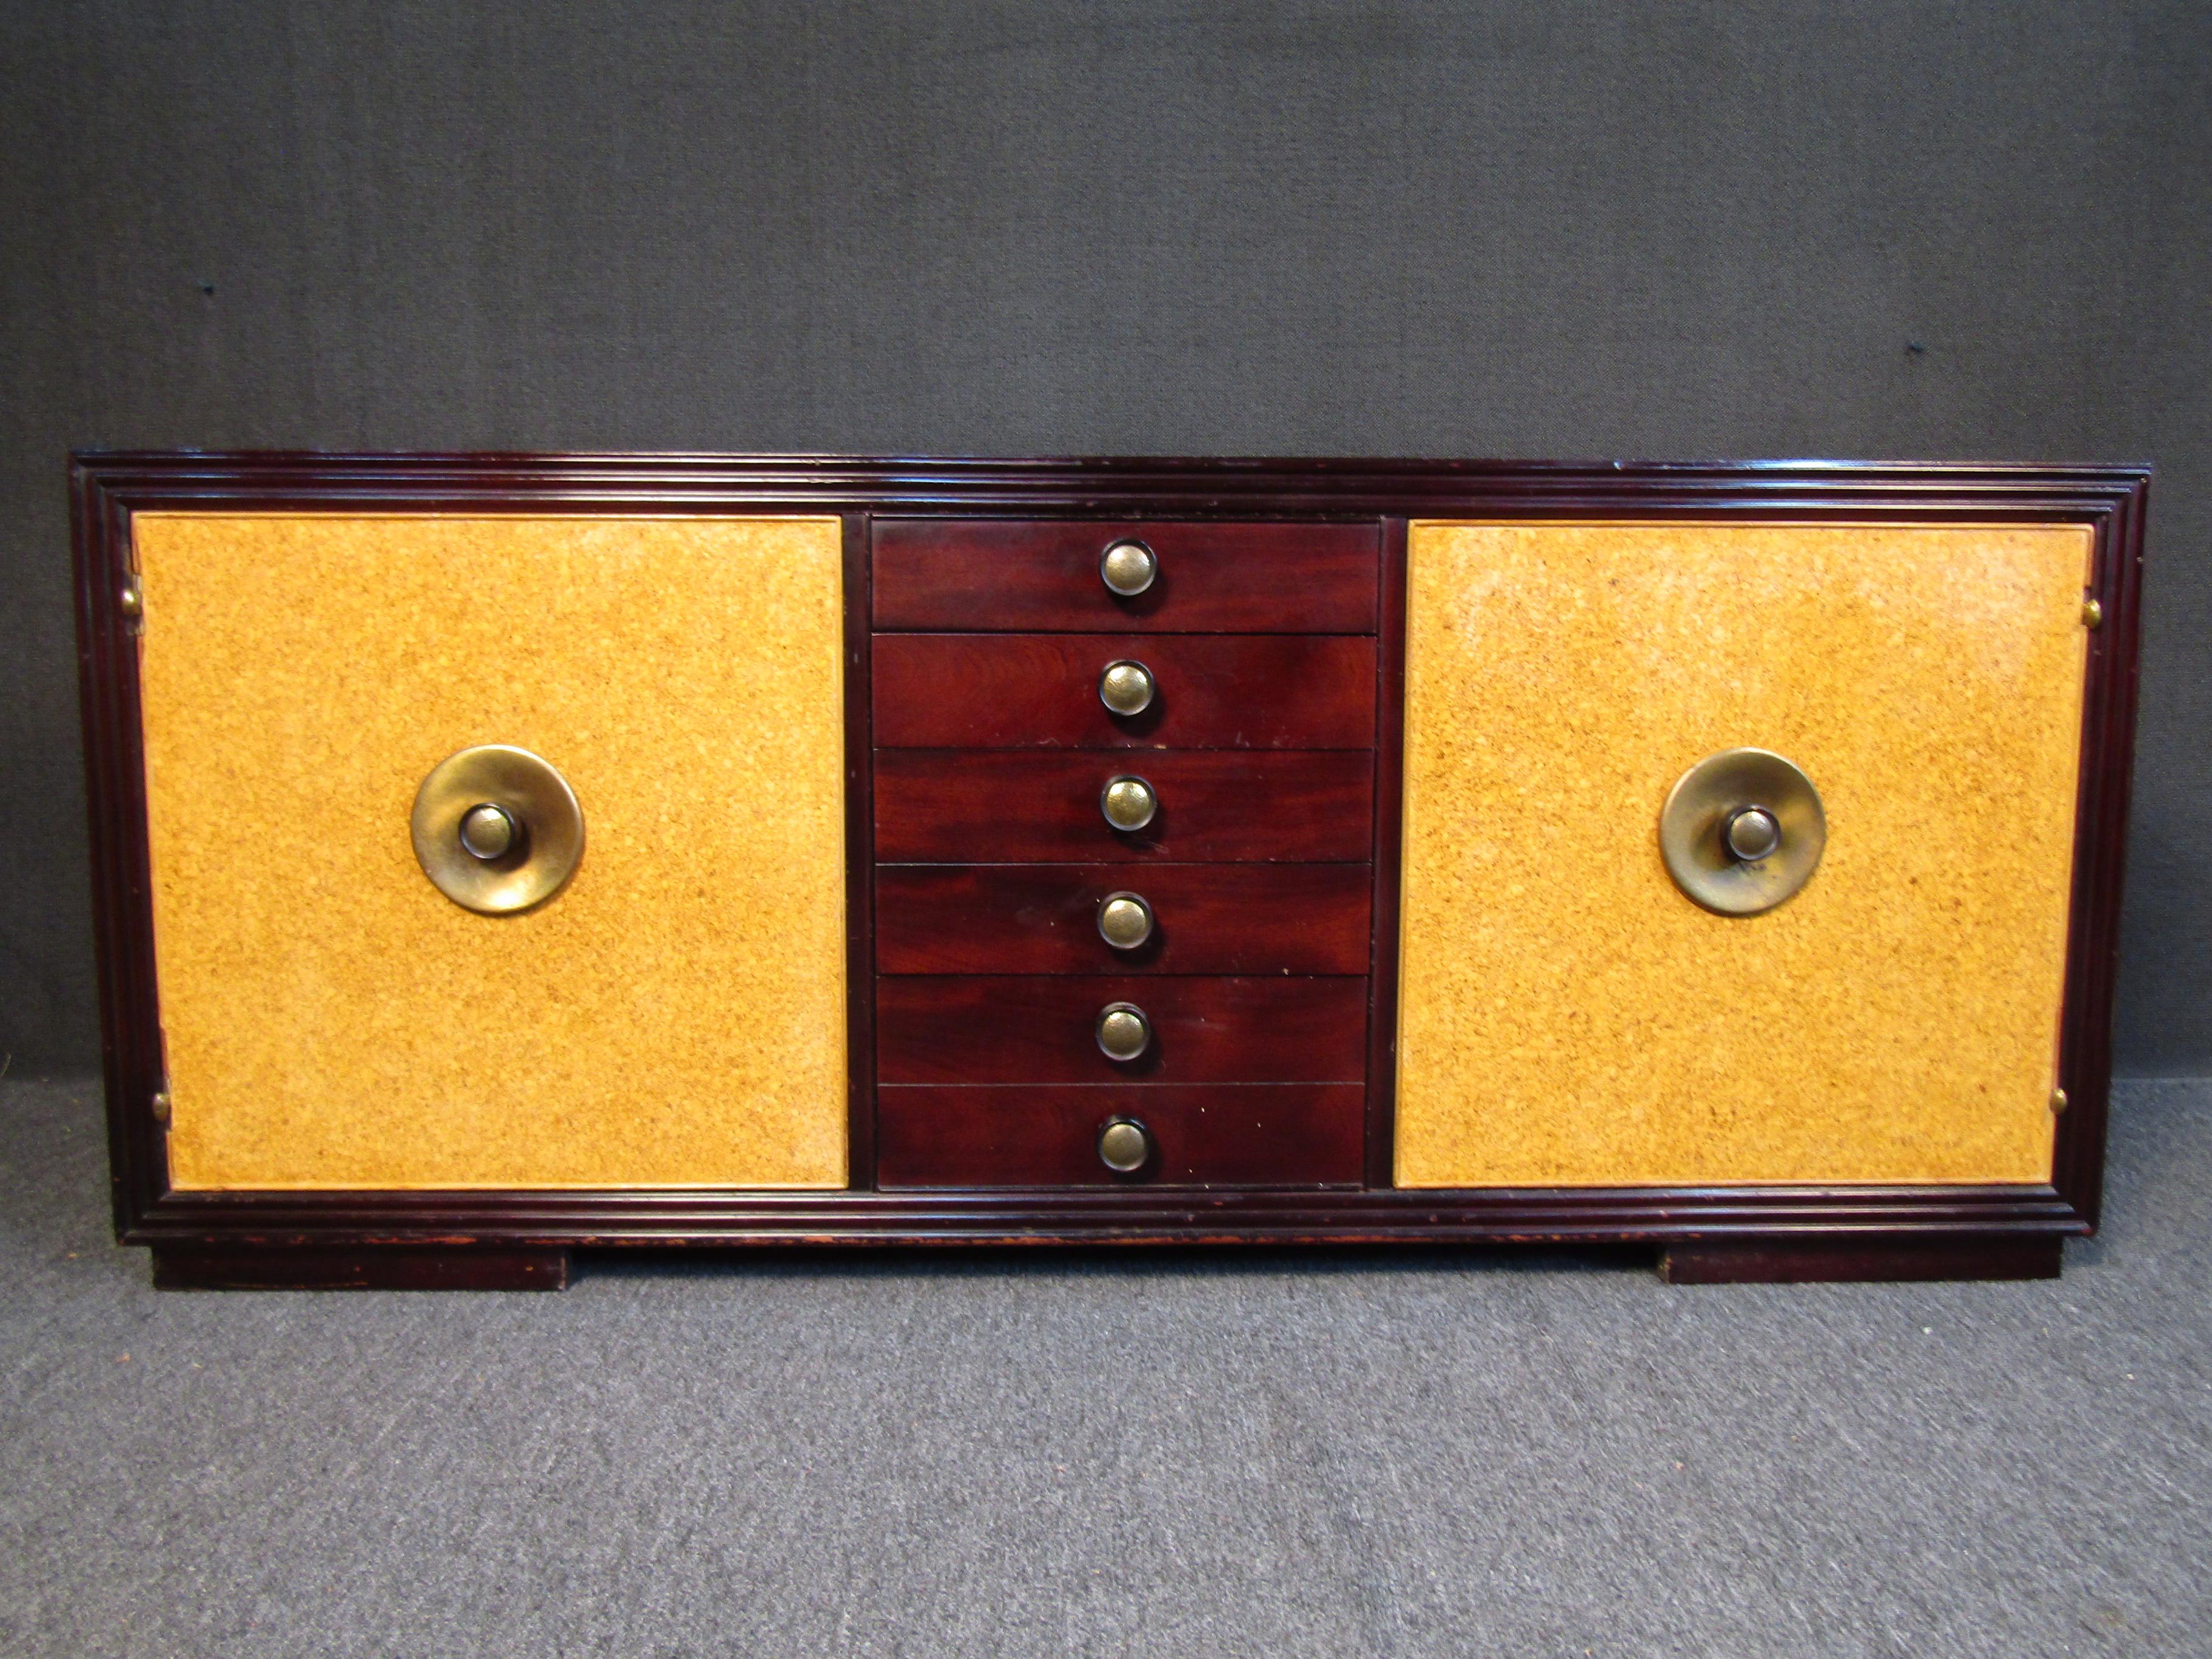 Paul Frankl for Johnson Brothers credenza featuring mahogany veneer, cork laminated doors and brass hardware. inside the left door holds 4 dovetail jointed drawers, right door contains 2 shelves. Designed by John Stuart.

(Please confirm location